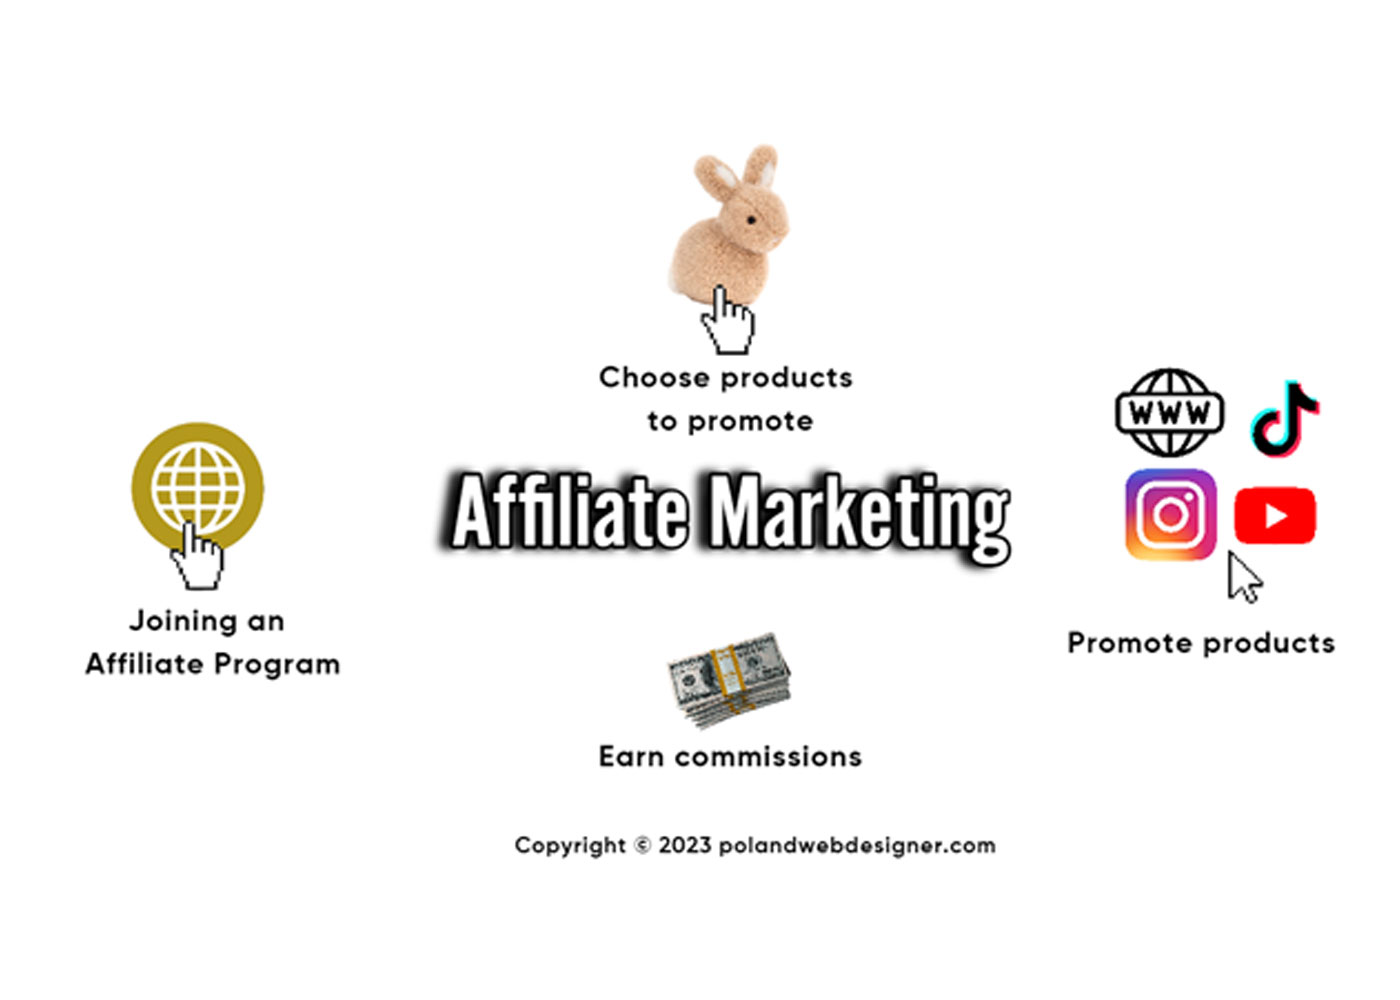 How to Start Affiliate Marketing: A Step-by-Step Guide